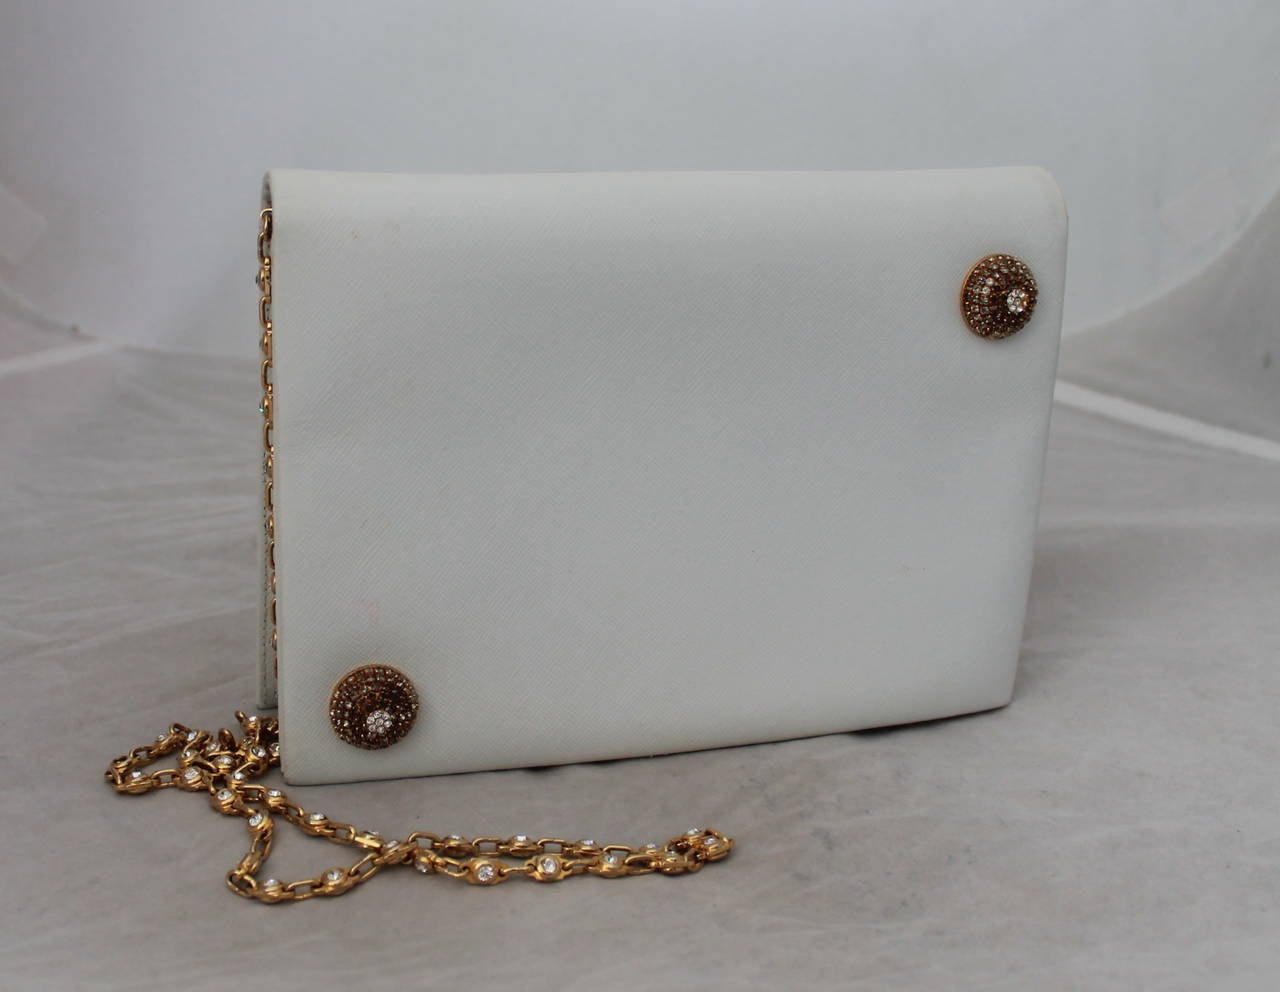 Valentino 1980's White Evening Bag with Rhinestone Detail & Chain. This bag is in excellent vintage condition with wear consistent with age. There is one rhinestone missing on the circular design seen on image 3. The chain is gold with rhinestones.